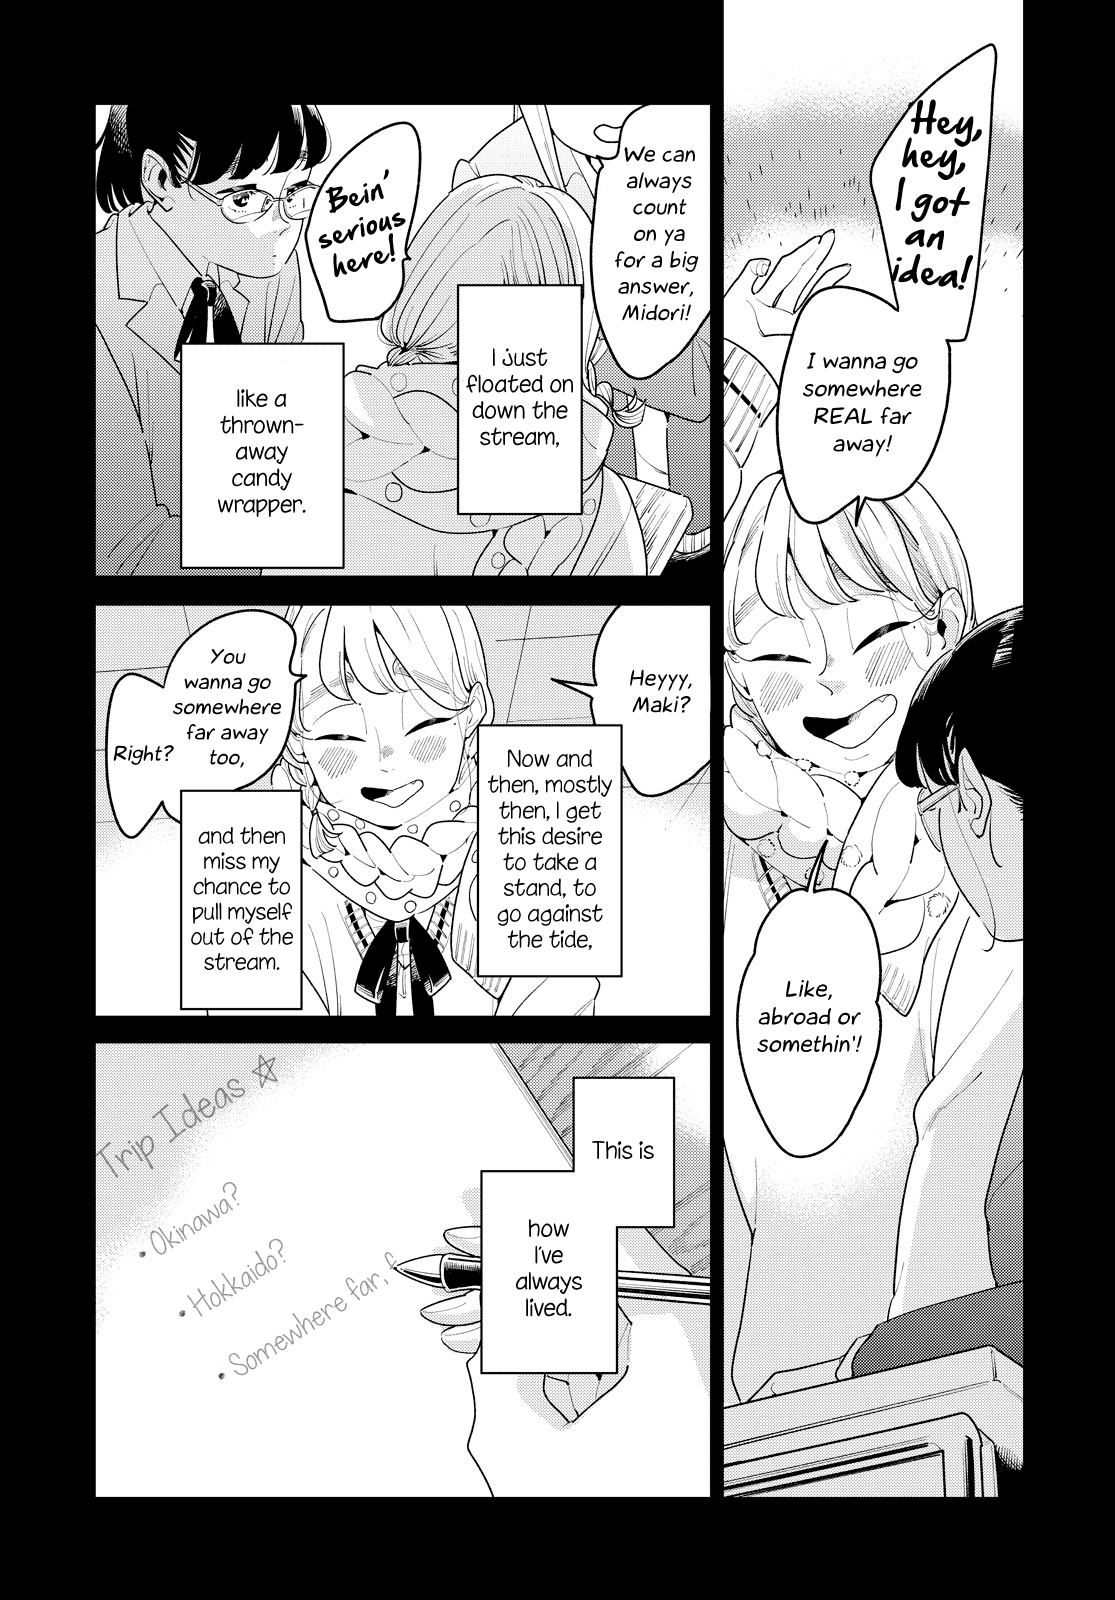 Run Away With Me, Girl - Page 3